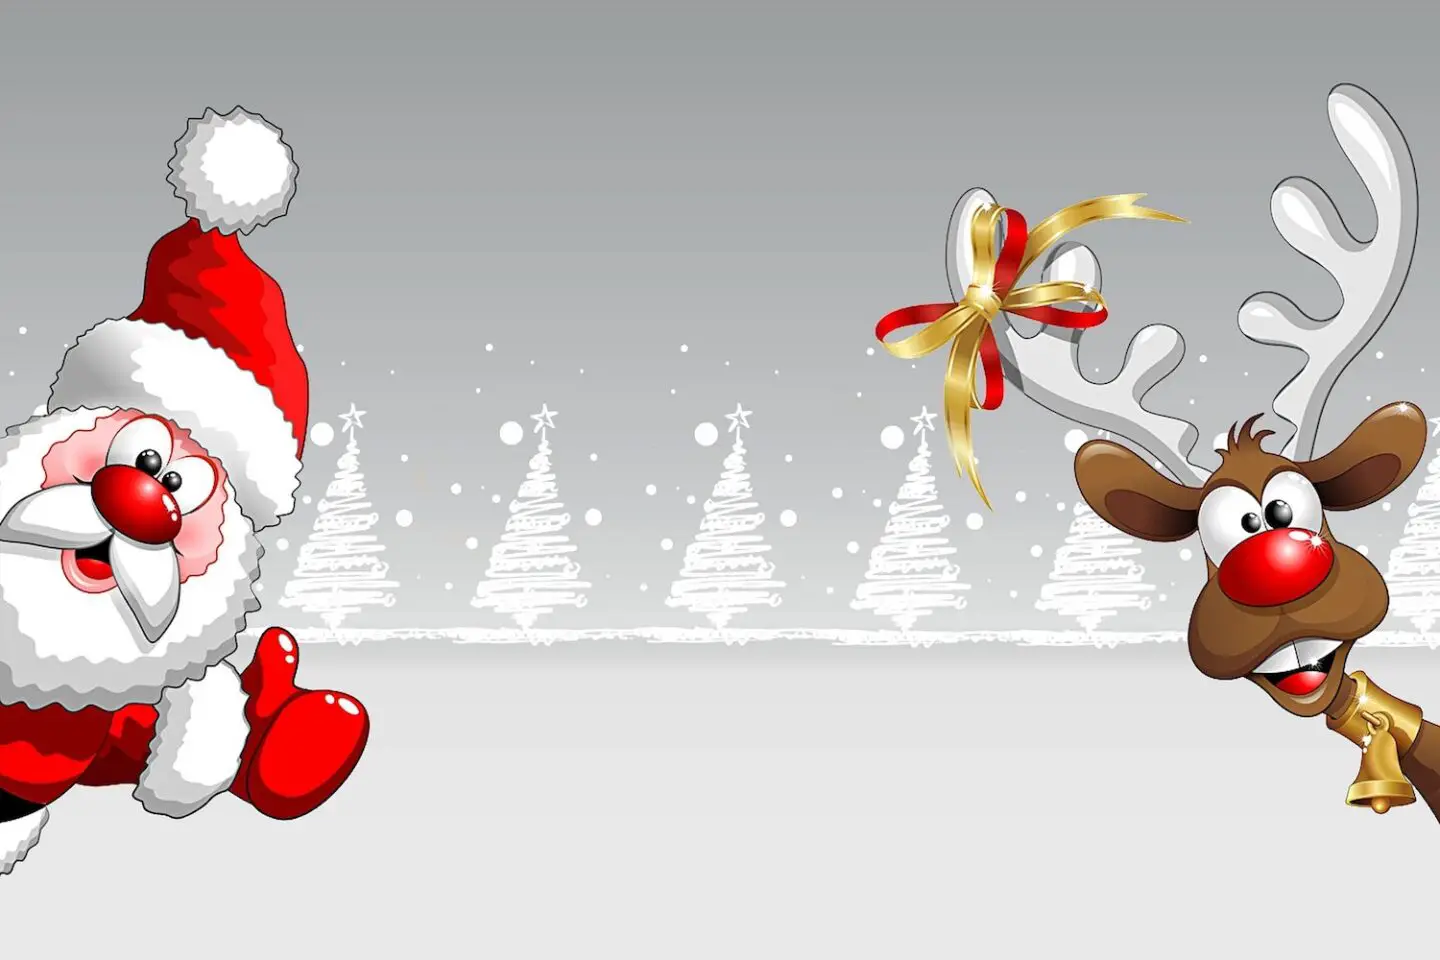 A grey image with a cartoon santa popping out from one side and Rudolph popping out from the other. Small white Christmas trees are across the background